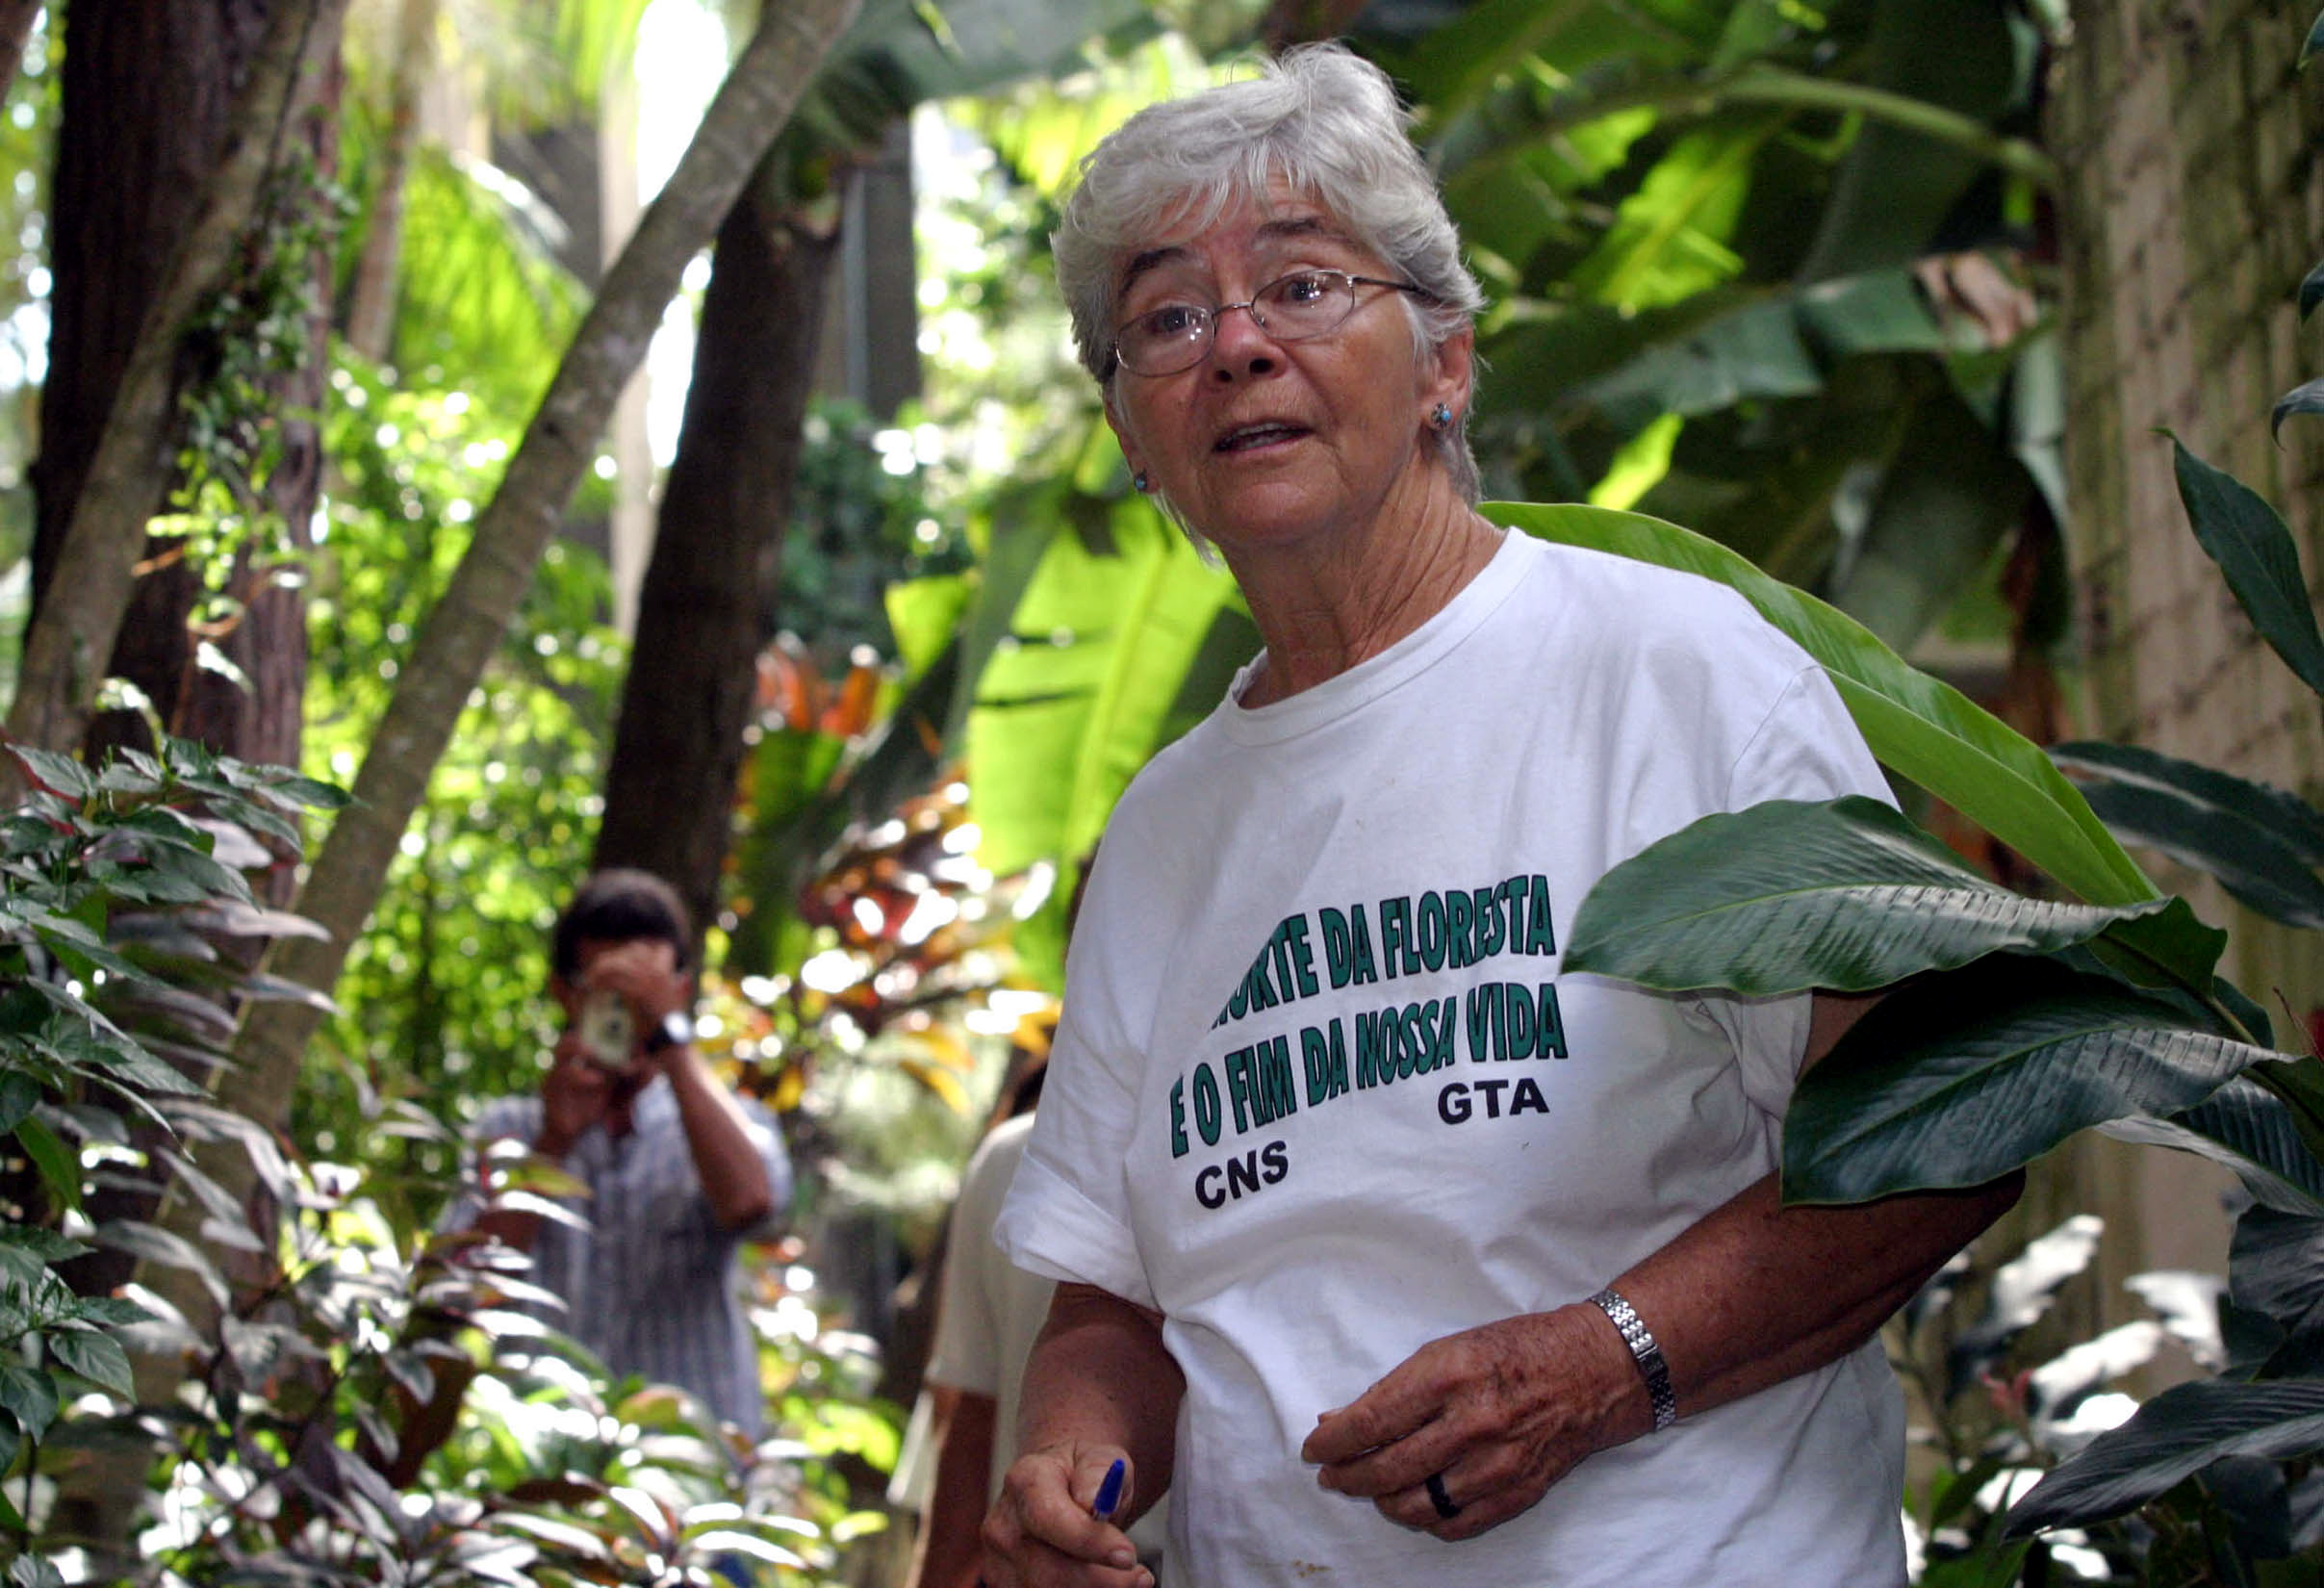 Dorothy Stang, a 74-year-old American nun, was shot to death early February 12, 2005 in Brazil's Amazon rain forest where she worked to defend human rights and the environment despite frequent death threats, federal police said. Unknown assailants shot U.S. missionary, Dorothy Stang at point-blank range at an isolated agricultural settlement in dense jungle 31 miles from the town of Anapu in the state of Para, police and fellow religious workers said. A February 12, 2004 file photo shows Missionary sister Dorothy Stang in Belem, northern Brazil.   (BRAZIL OUT)   REUTERS/Imapress/AE/Carlos Silva